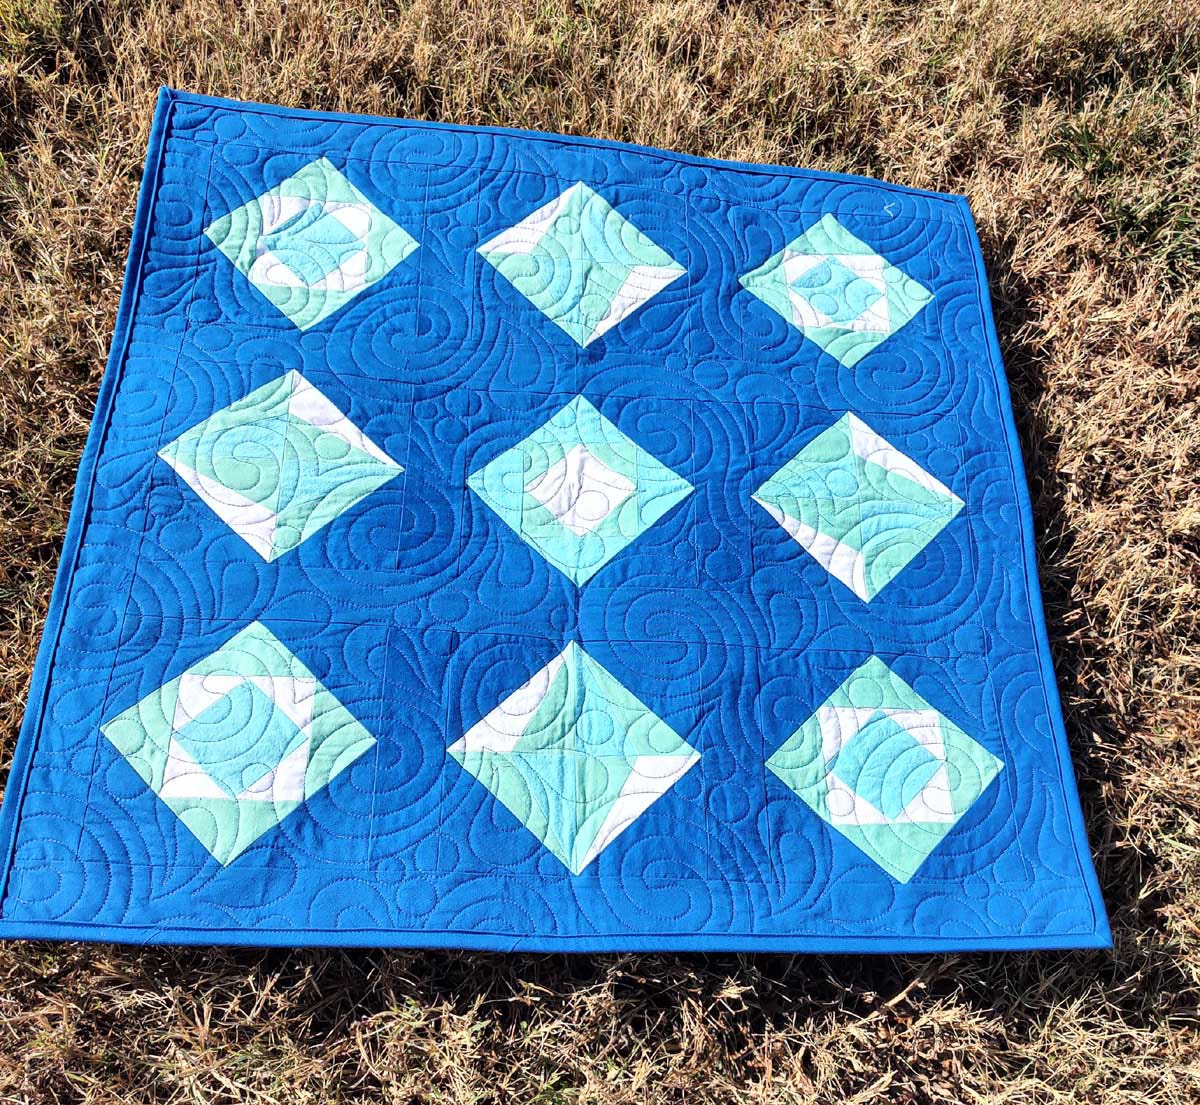 Finished Diamond and Chinese Lanterns Quilt On Grass